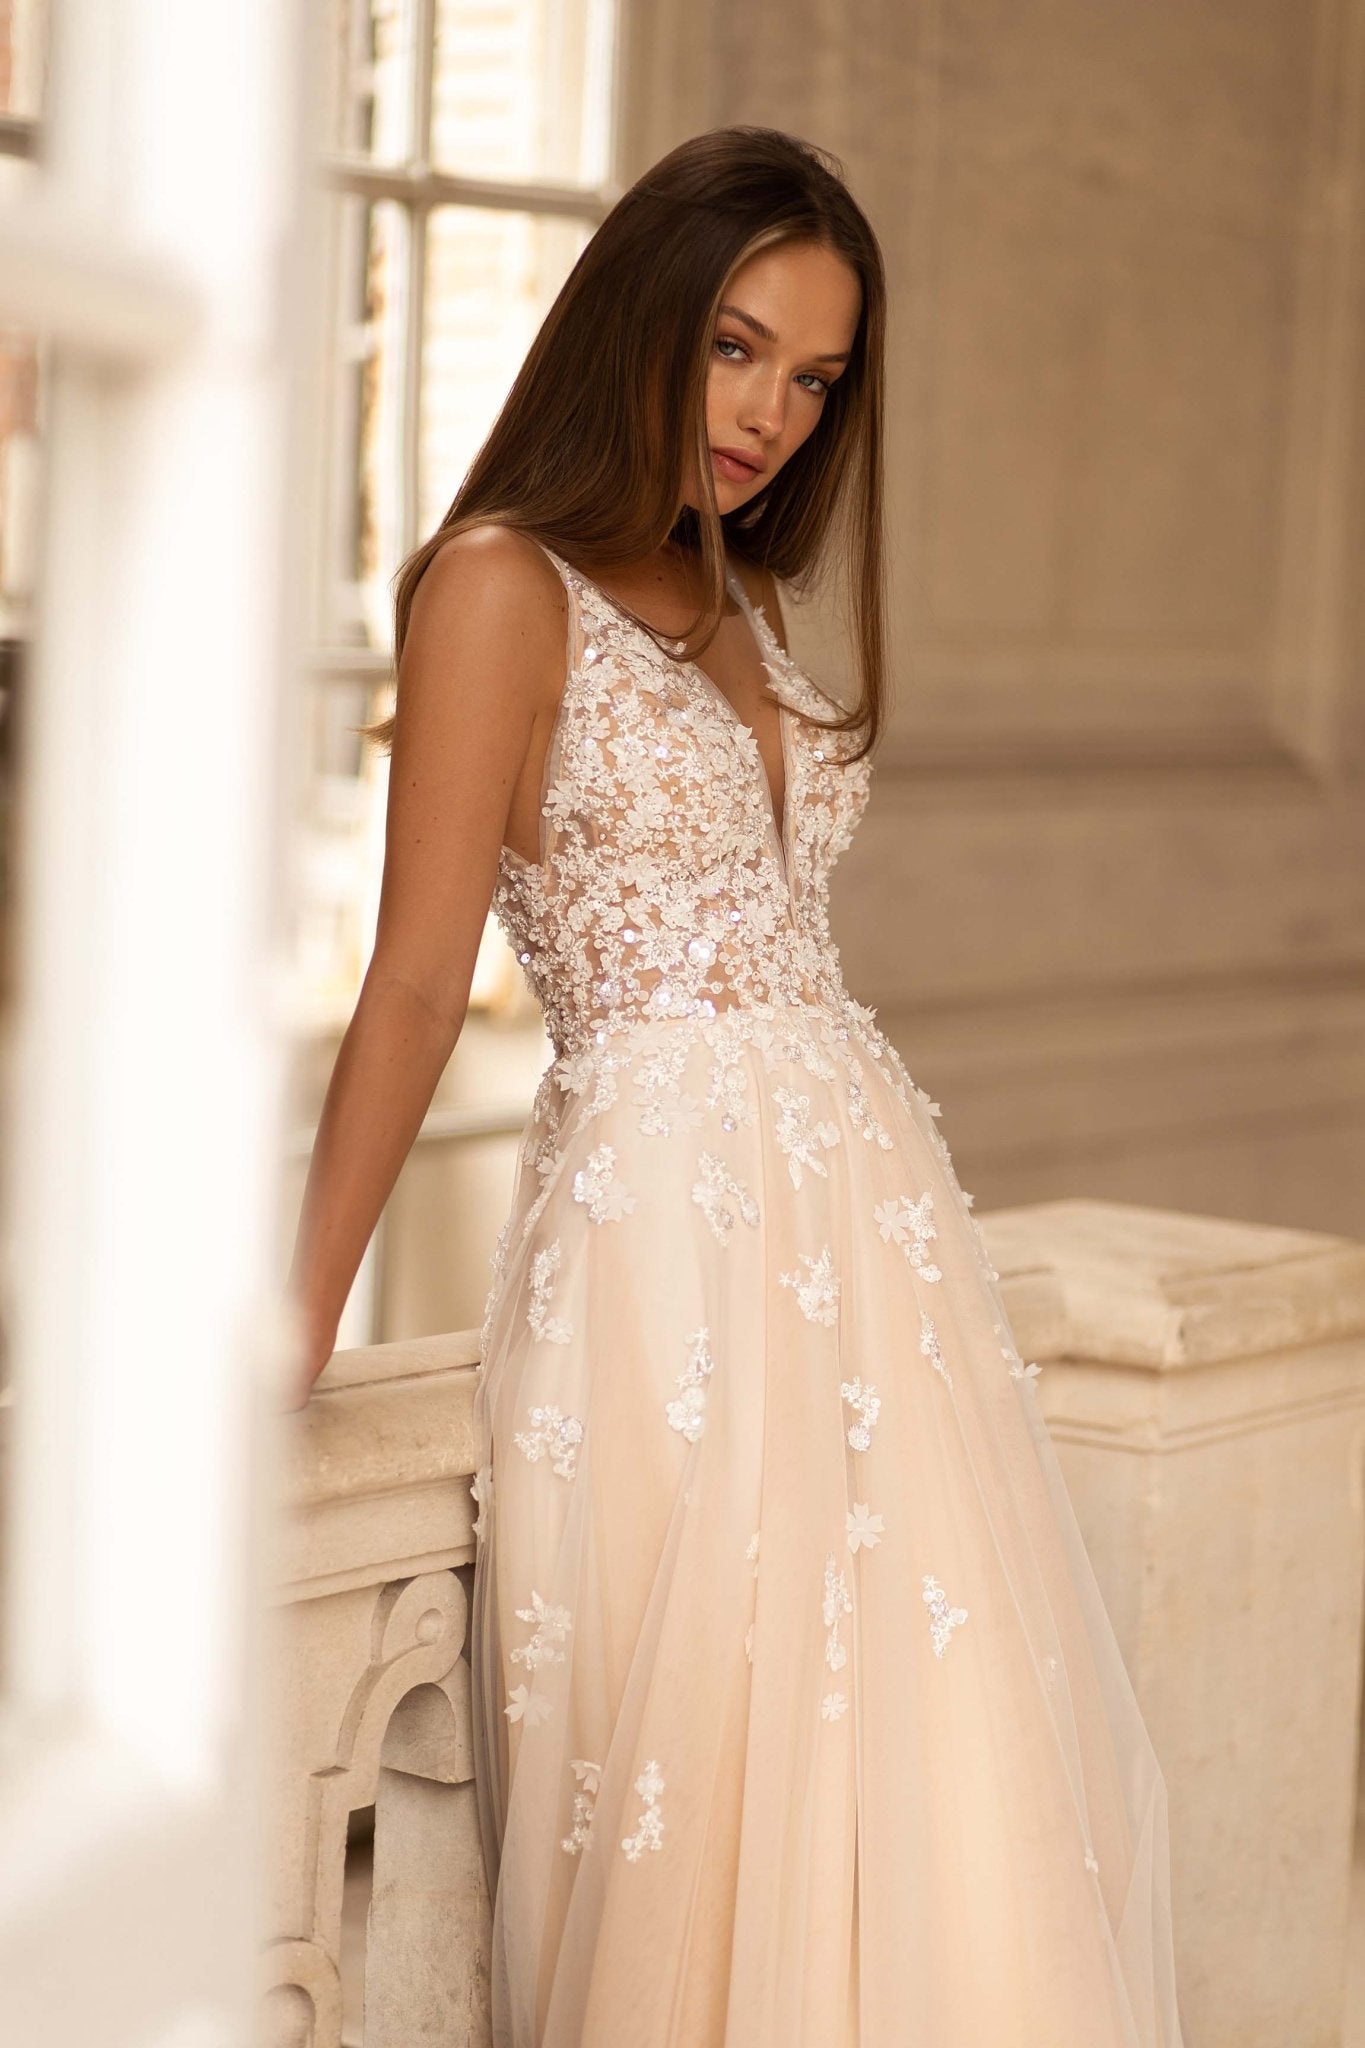 Champagne Wedding Dress with Sleeves, Sparkly Nude Tulle and 3D Floral Appliqués - Plus Size - WonderlandByLilian